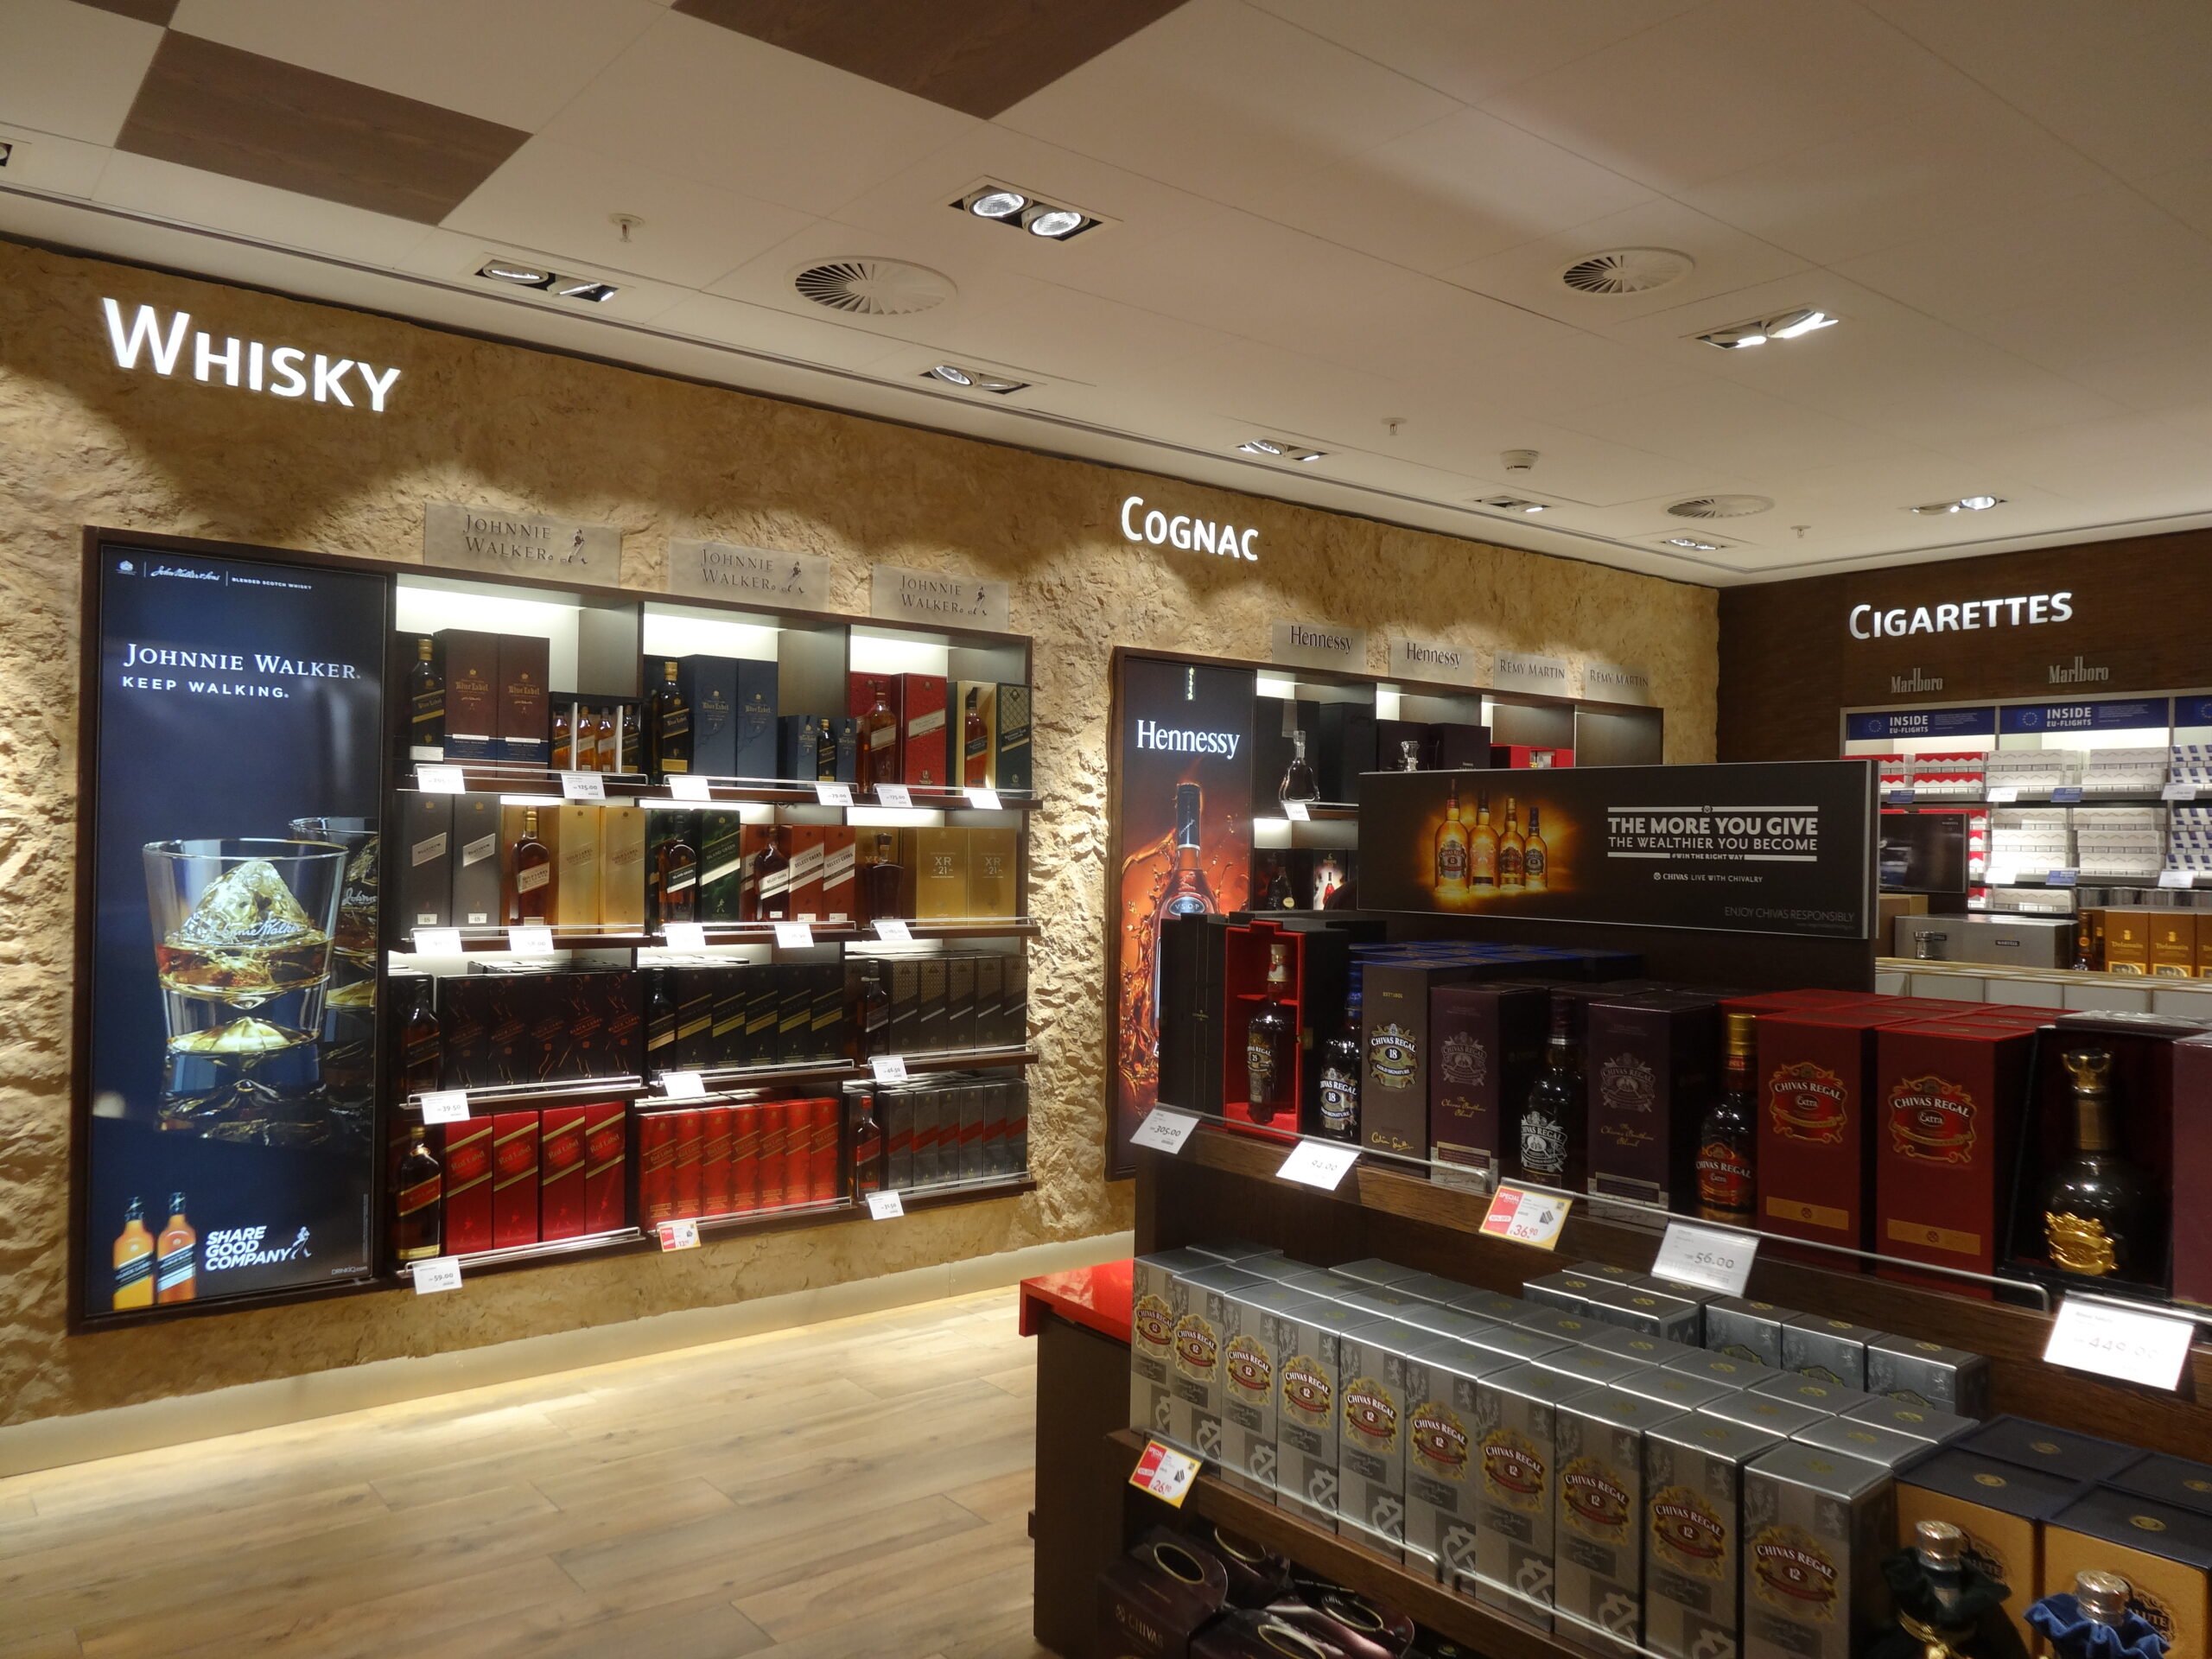 The Schiphol Airport Retail main store carries many signature design touches from Gebr Heinemann, majority owner since last year